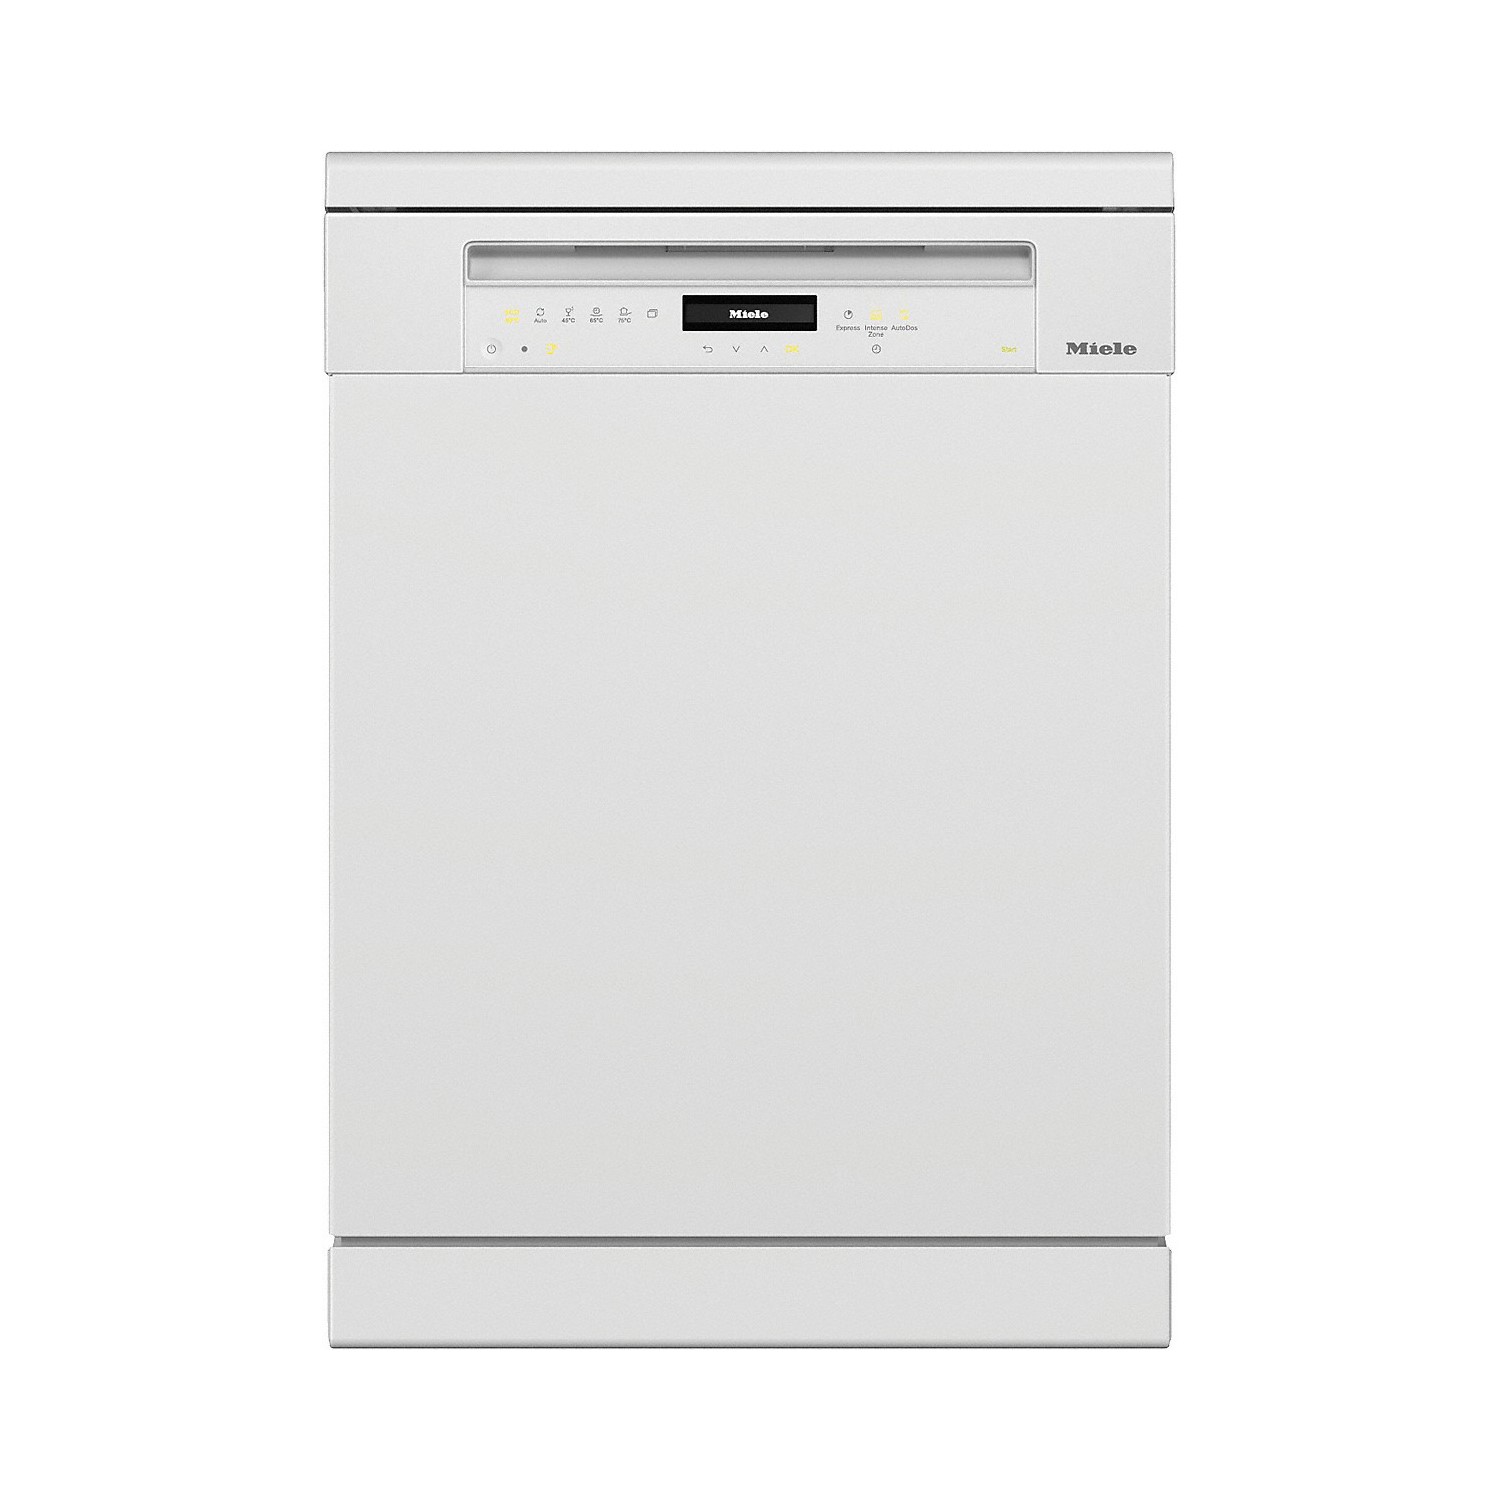 Refurbished Miele G7000 G7312SCwh 14 Place Freestanding Dishwasher White